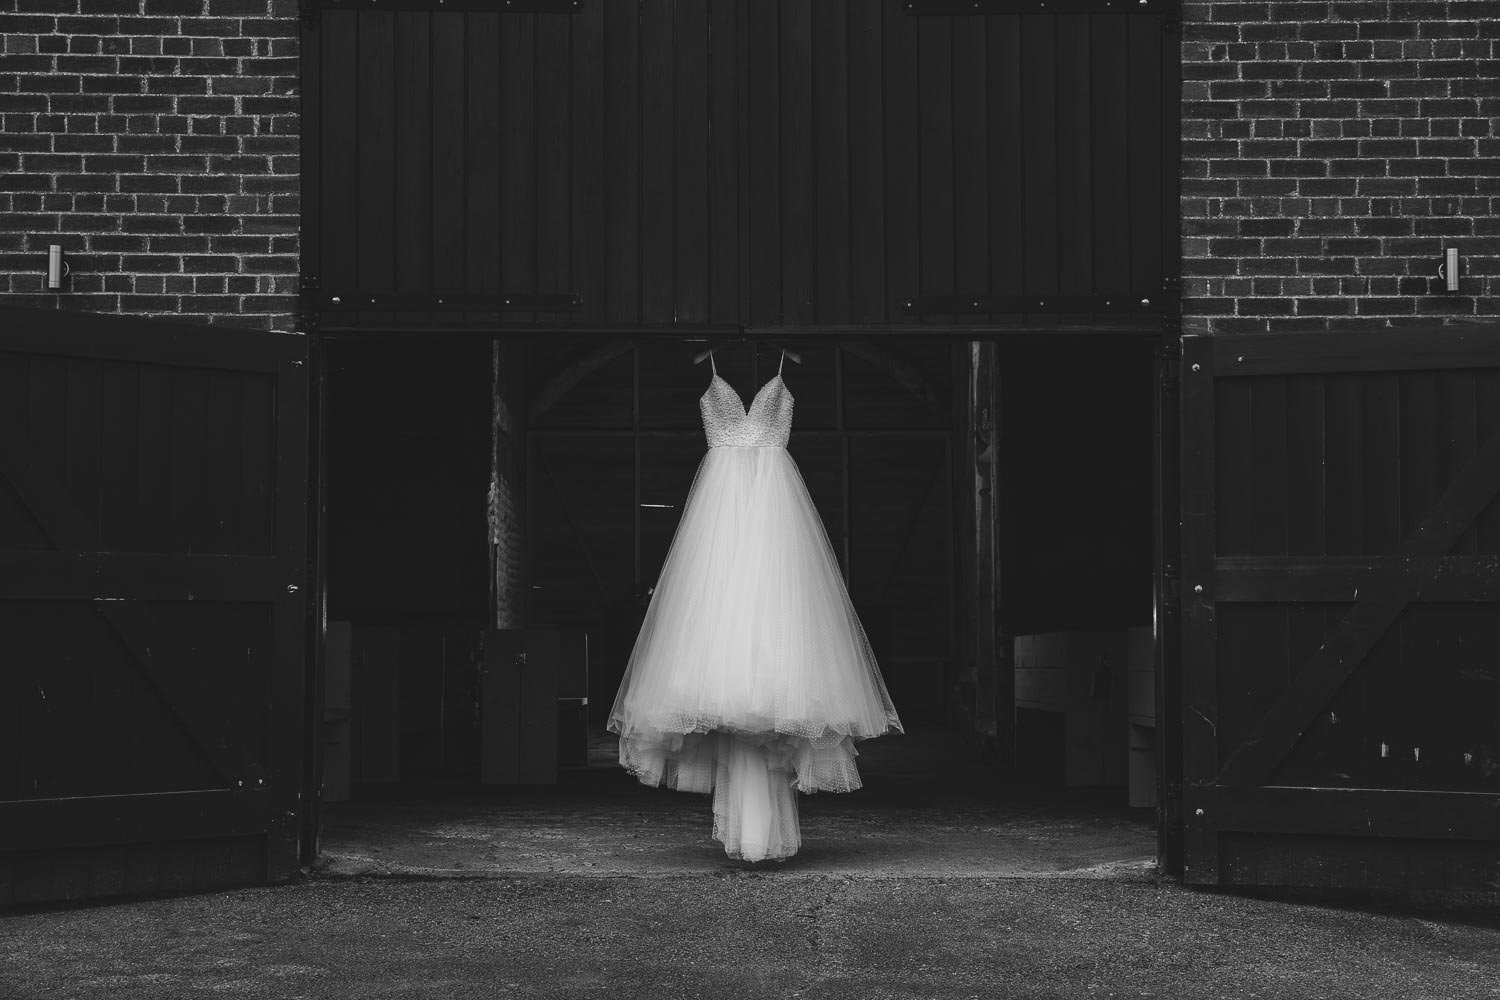 Dress floating in doorway of The Old Barn at Milling Barn